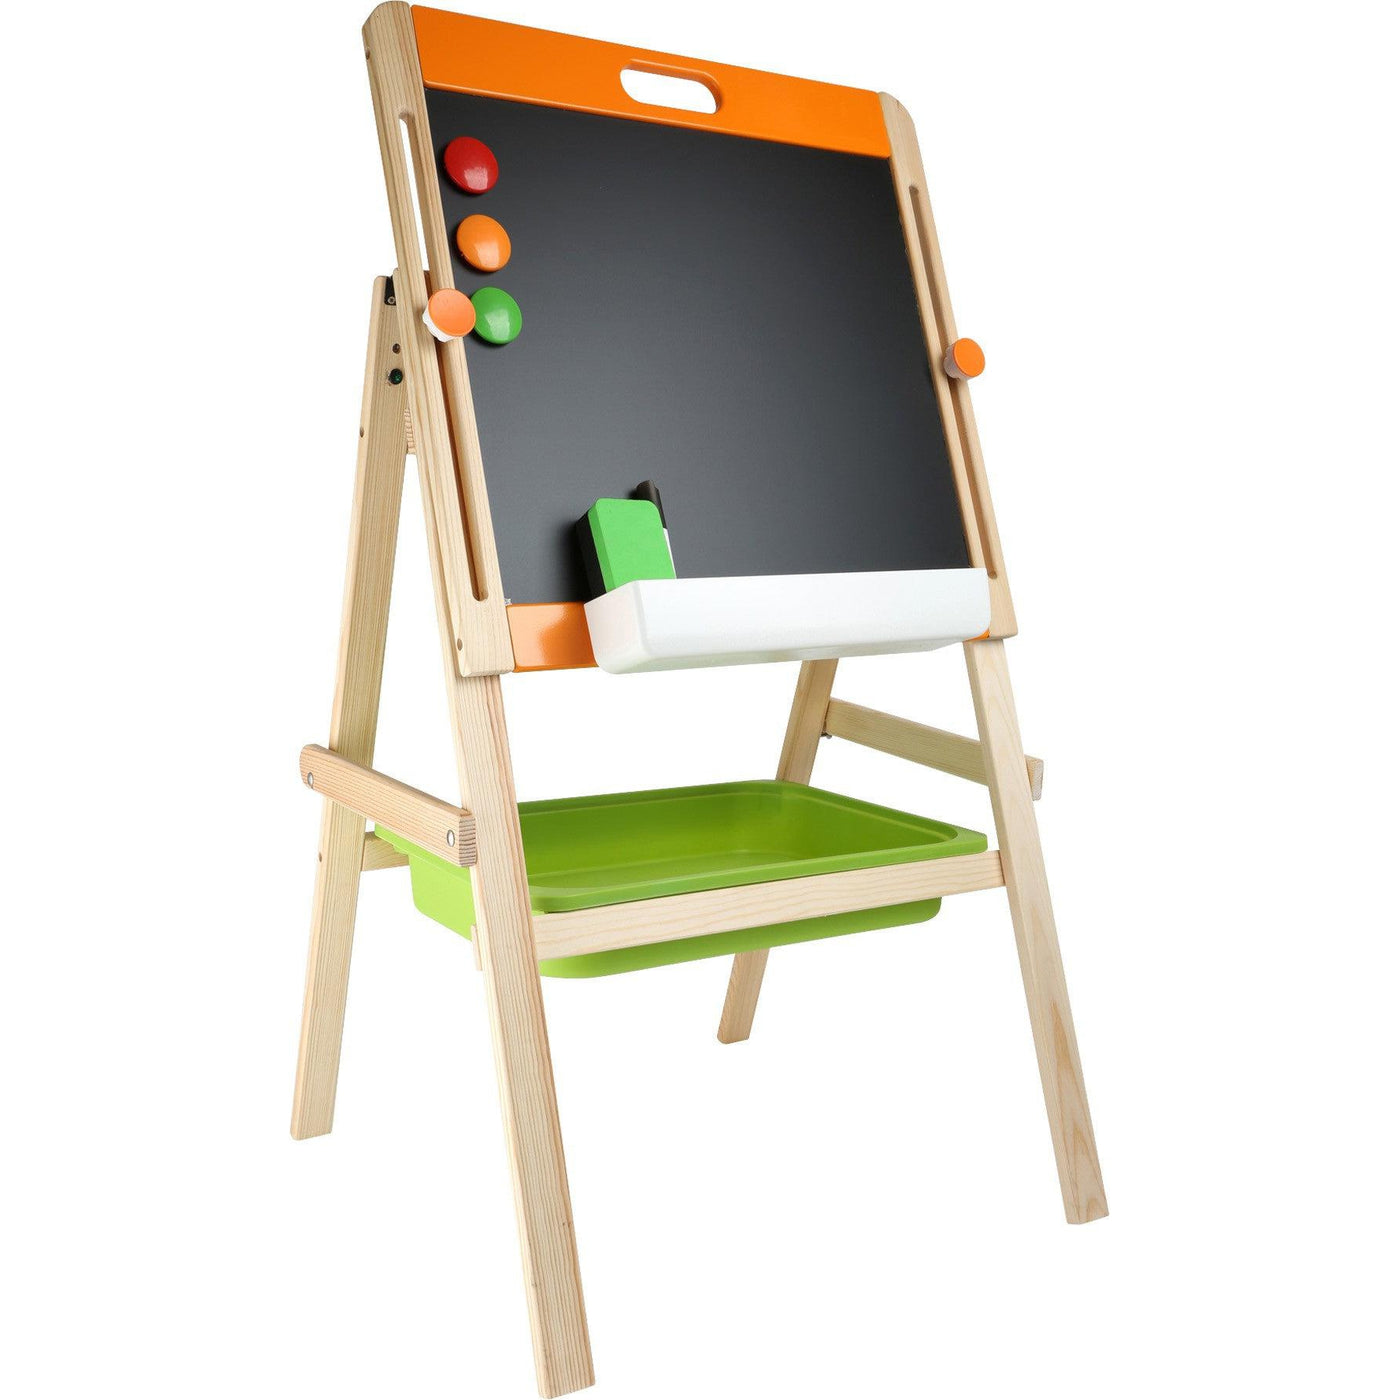 Chalk and Magnet Board and Easel